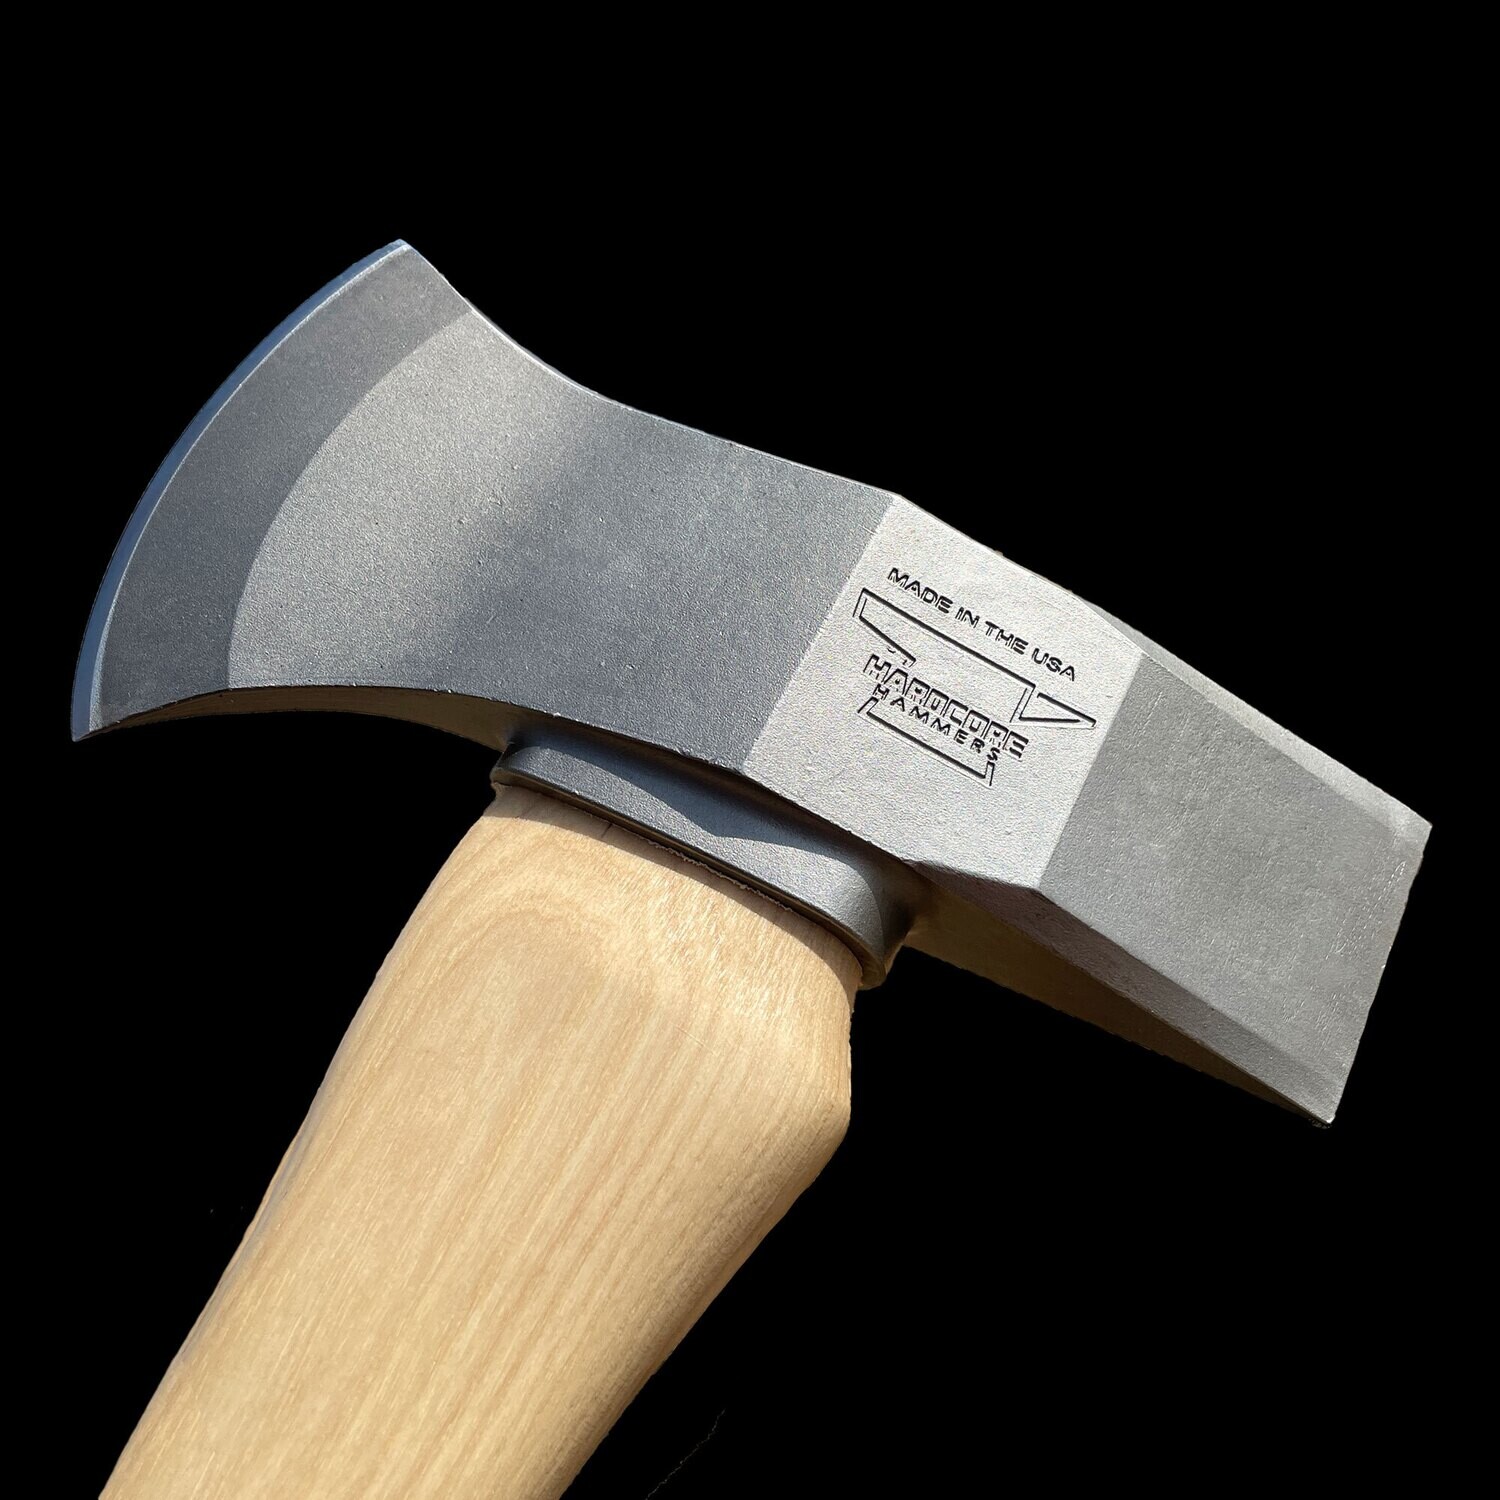 The Forester TR Axe